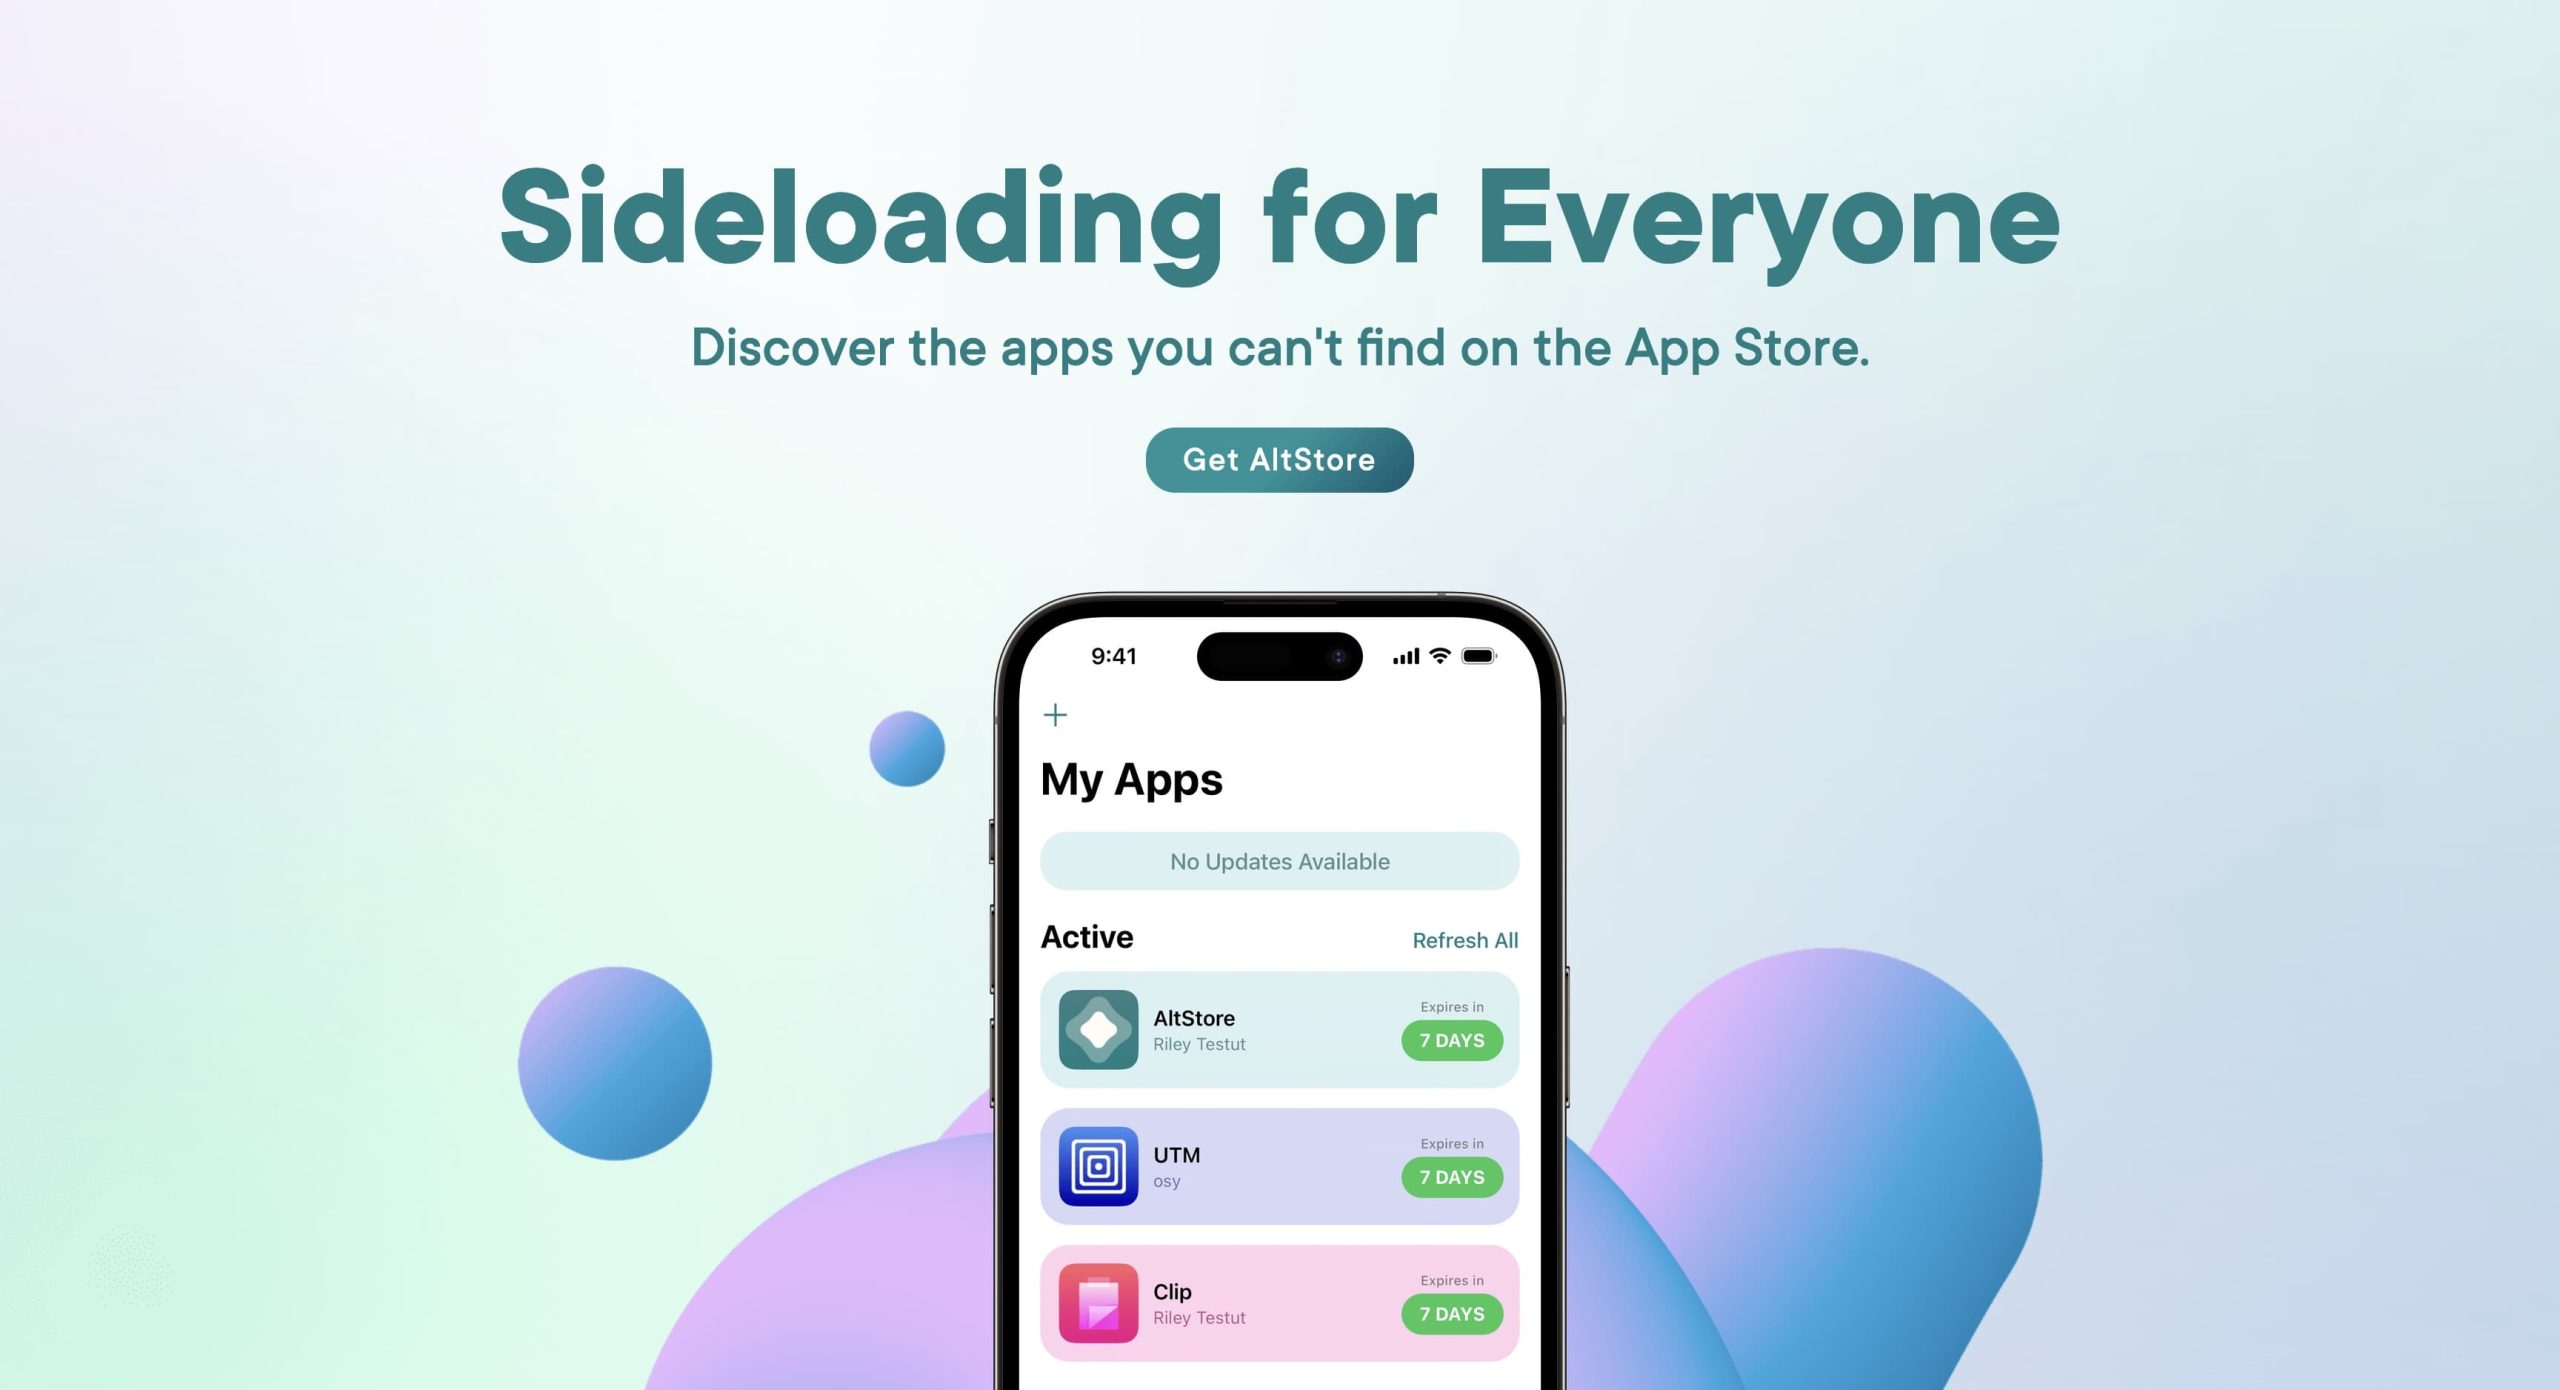 How to install & set up AltStore to sideload apps on iPhone or iPad